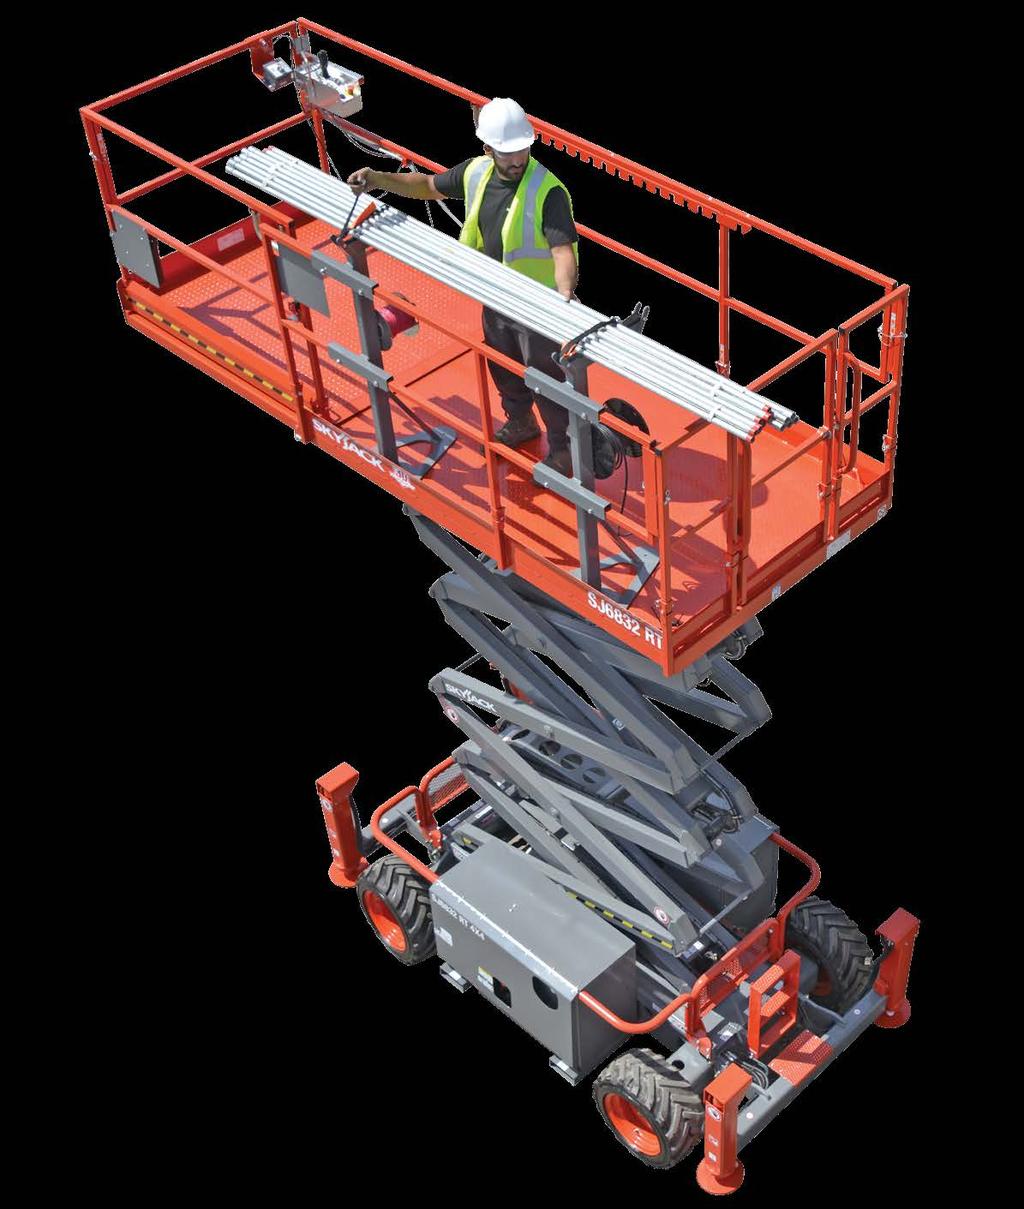 RT HEAVY DUTY PIPE RACK Designed, tested, and certified by Skyjack Ideal for HVAC, plumbing and fire sprinkler installation, the heavy duty pipe rack is designed for durability and sturdiness.